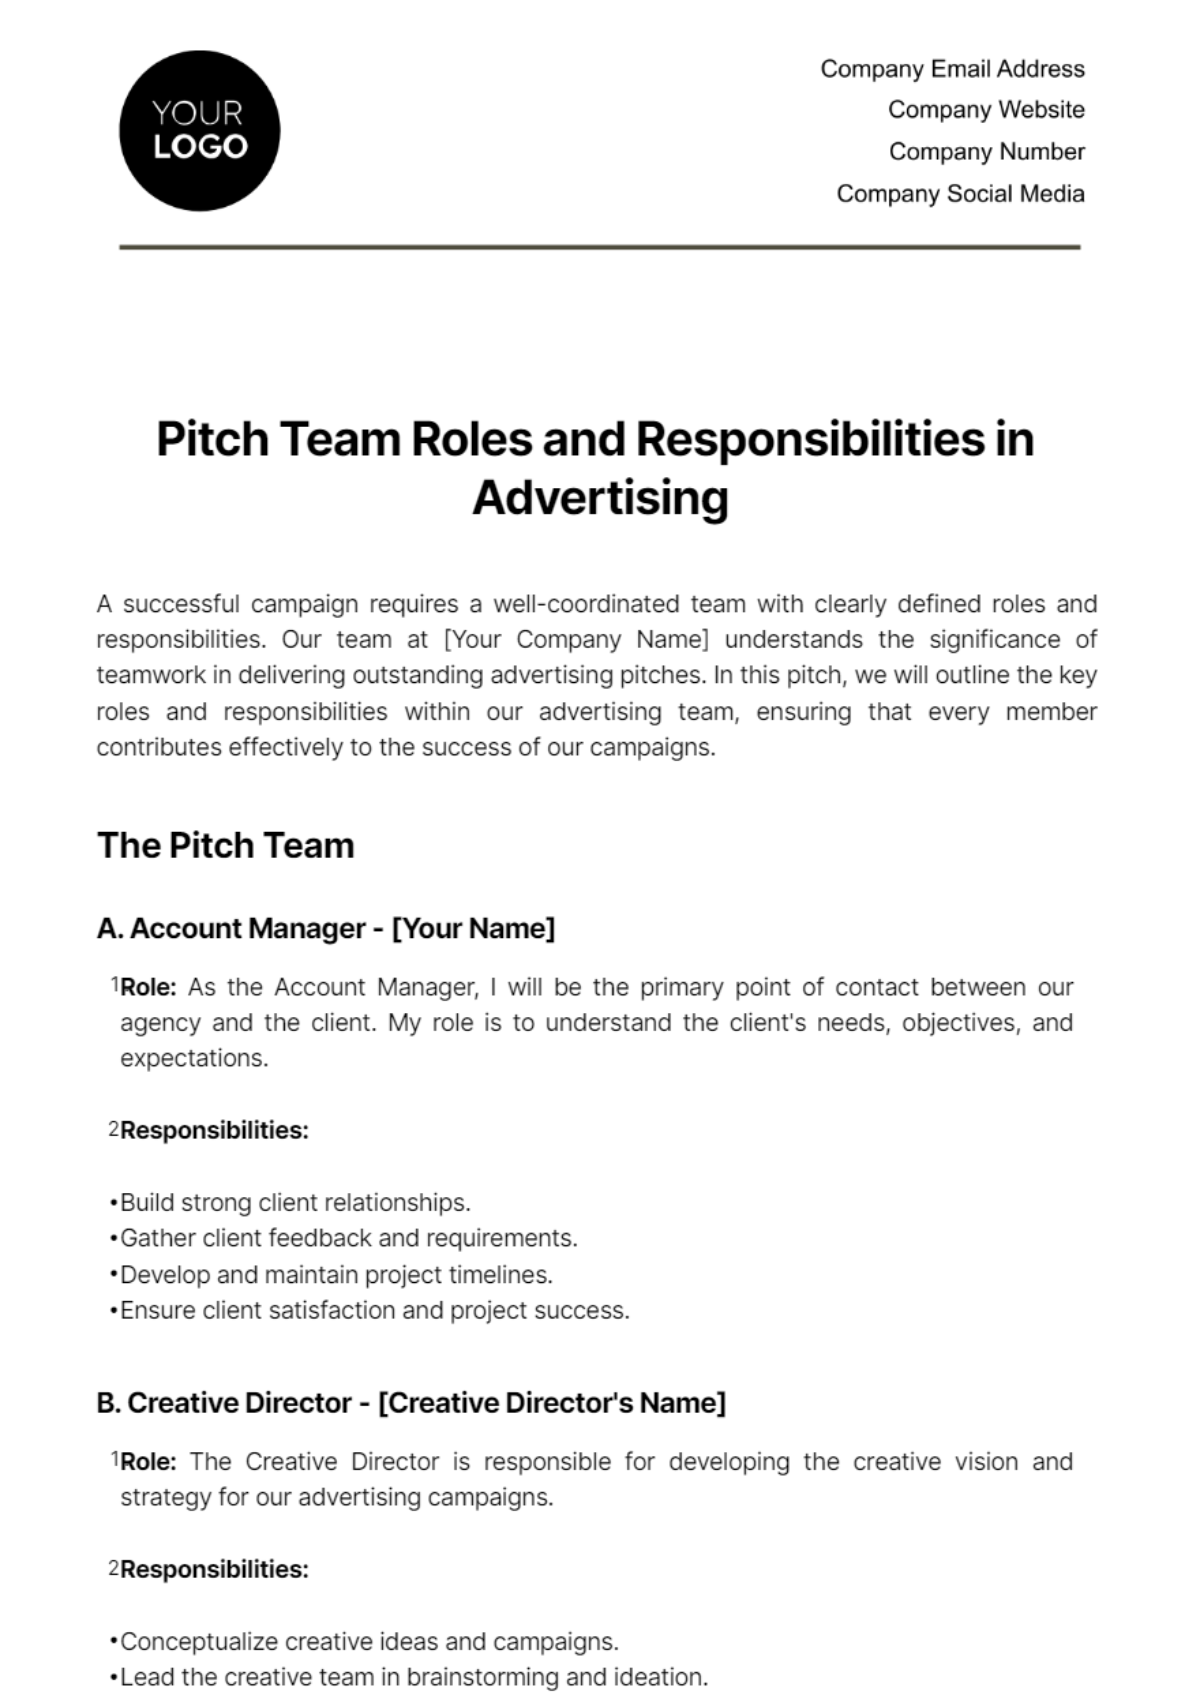 Free Pitch Team Roles and Responsibilities in Advertising Template